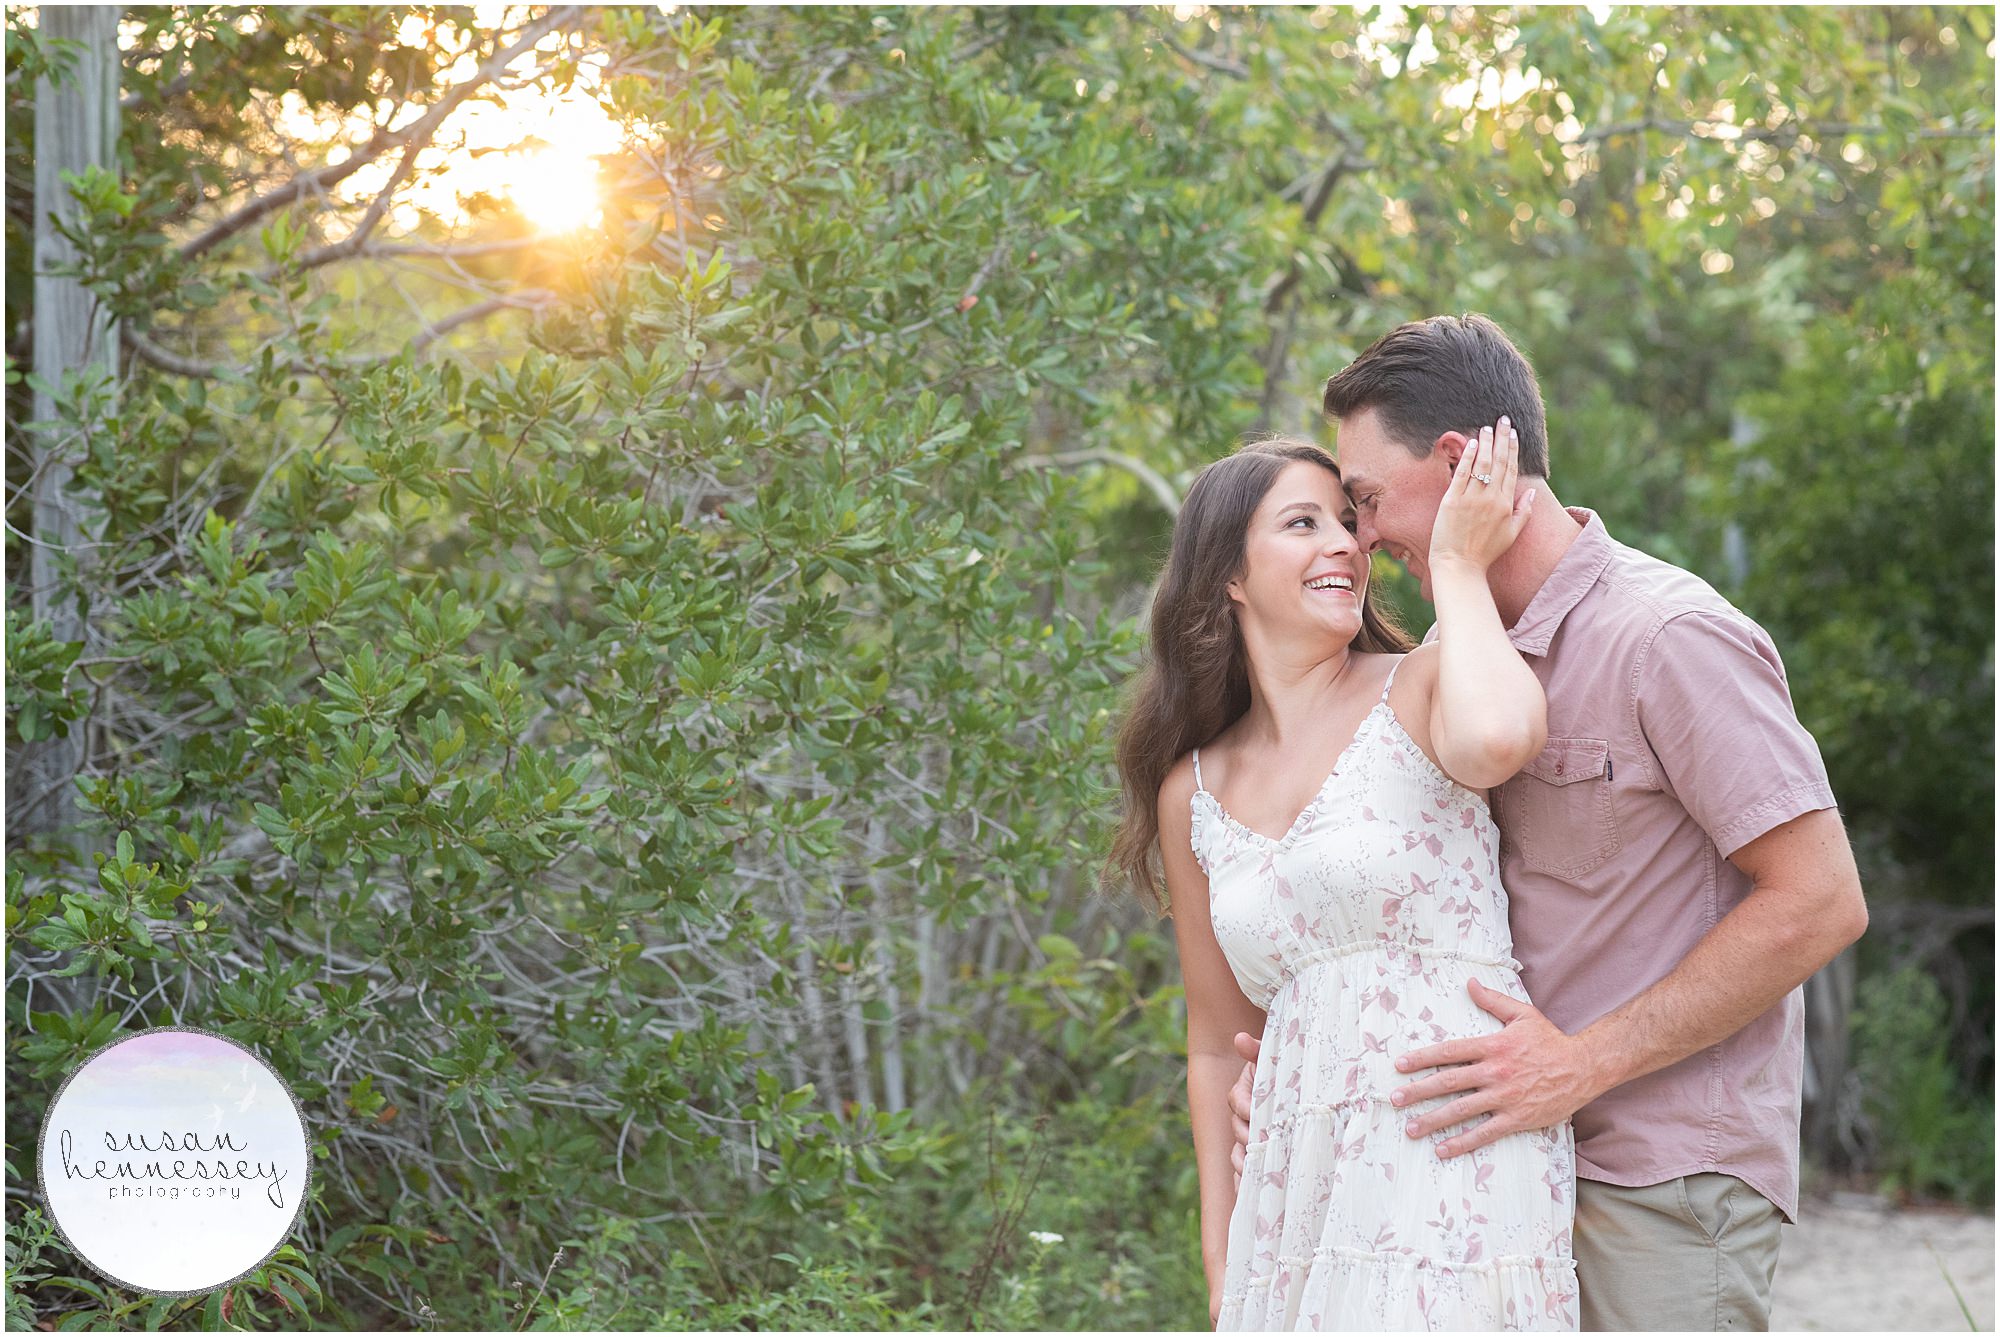 Happily engaged couple at Corson's Inlet Engagement Session